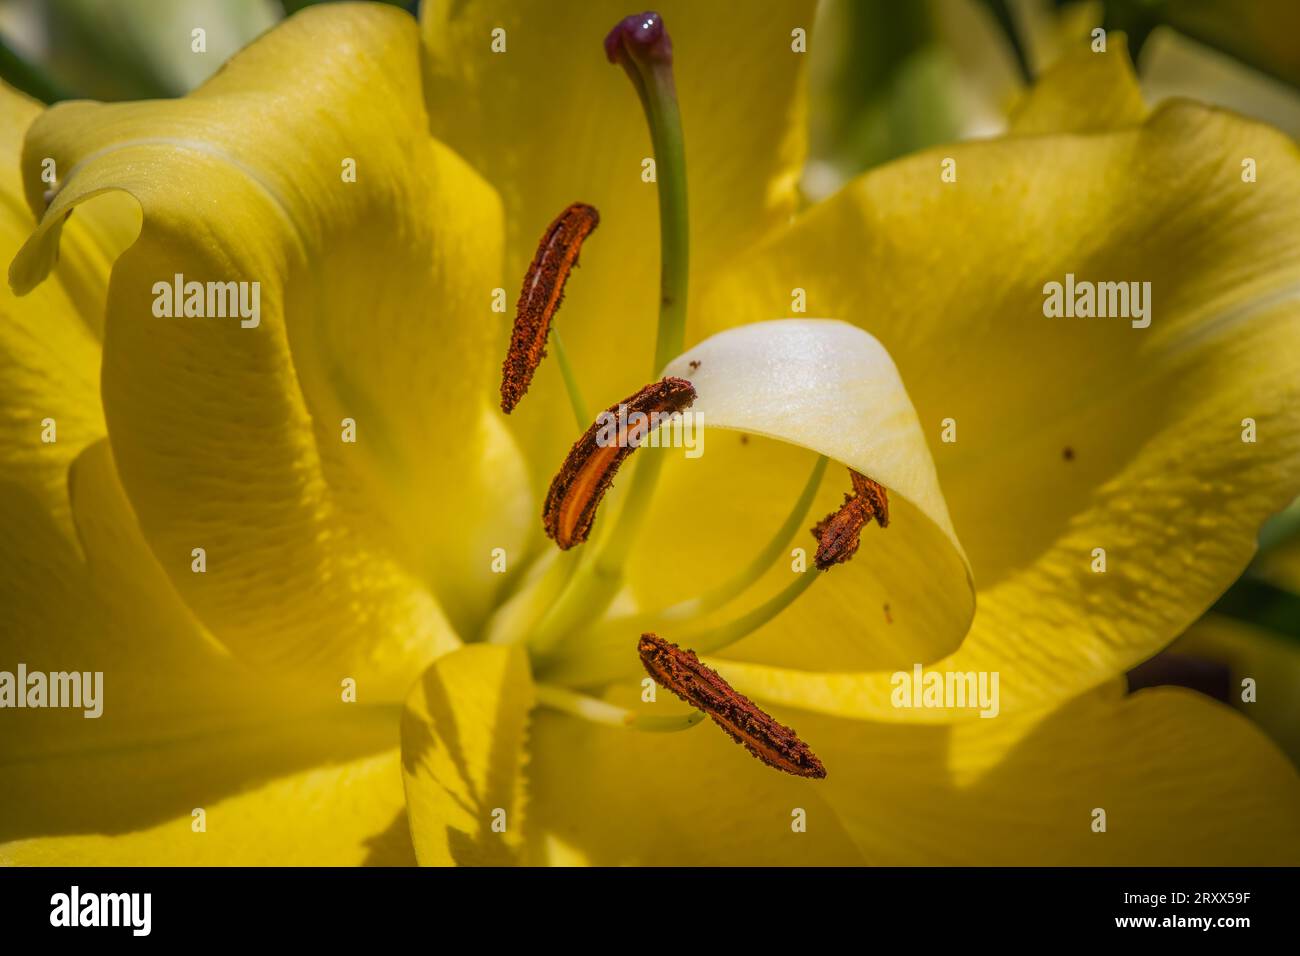 Close up of yellow trumpet lily anther and other reproductive parts. Stock Photo